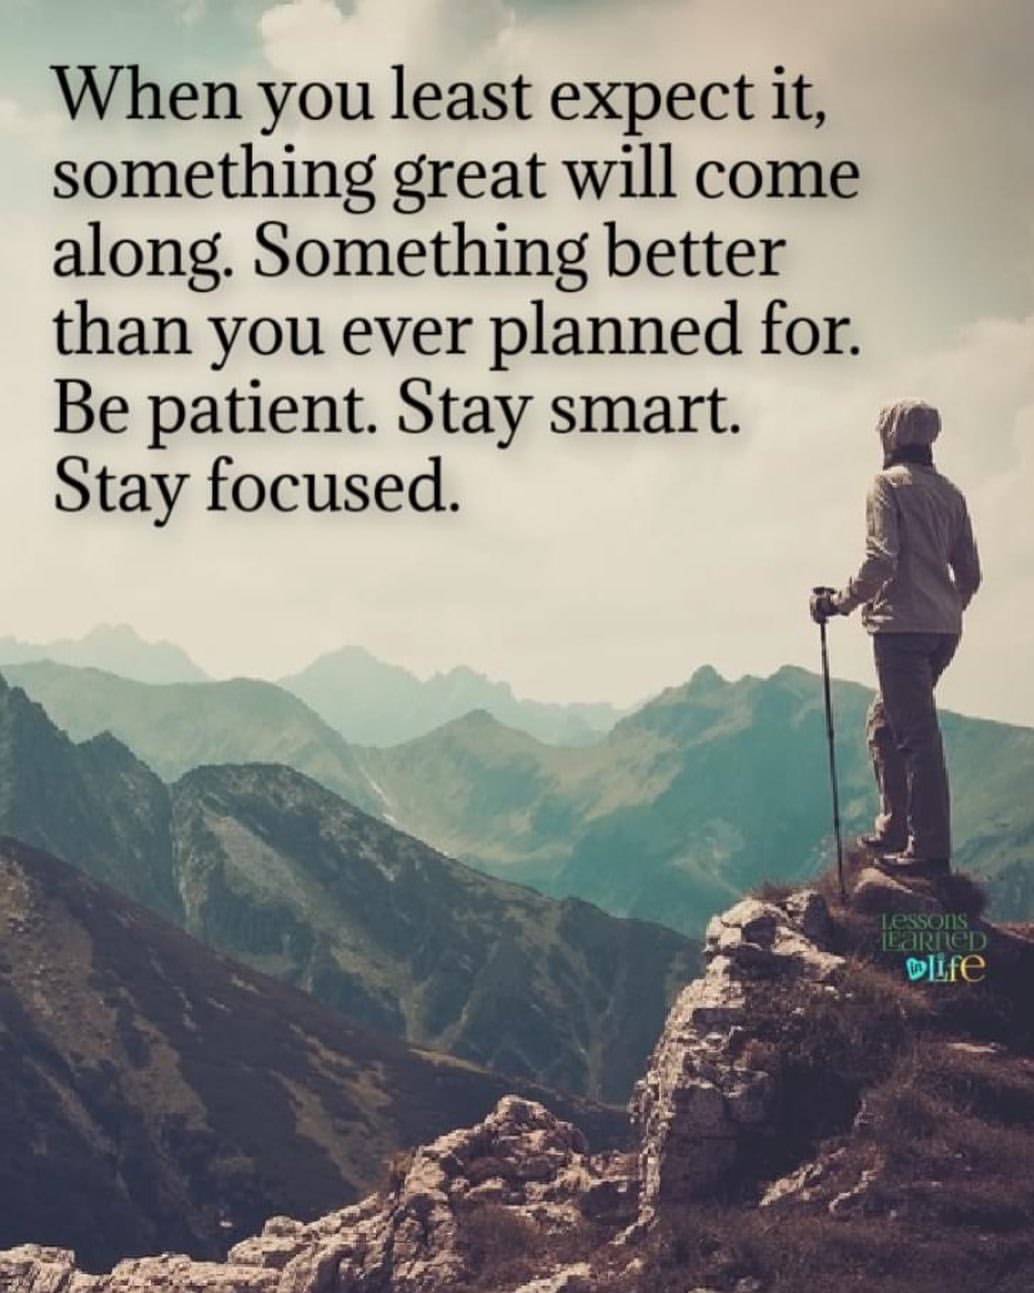 When you least expect it, something great will come along. Something better than you ever planned for. Be patient. Stay smart. Stay focused.